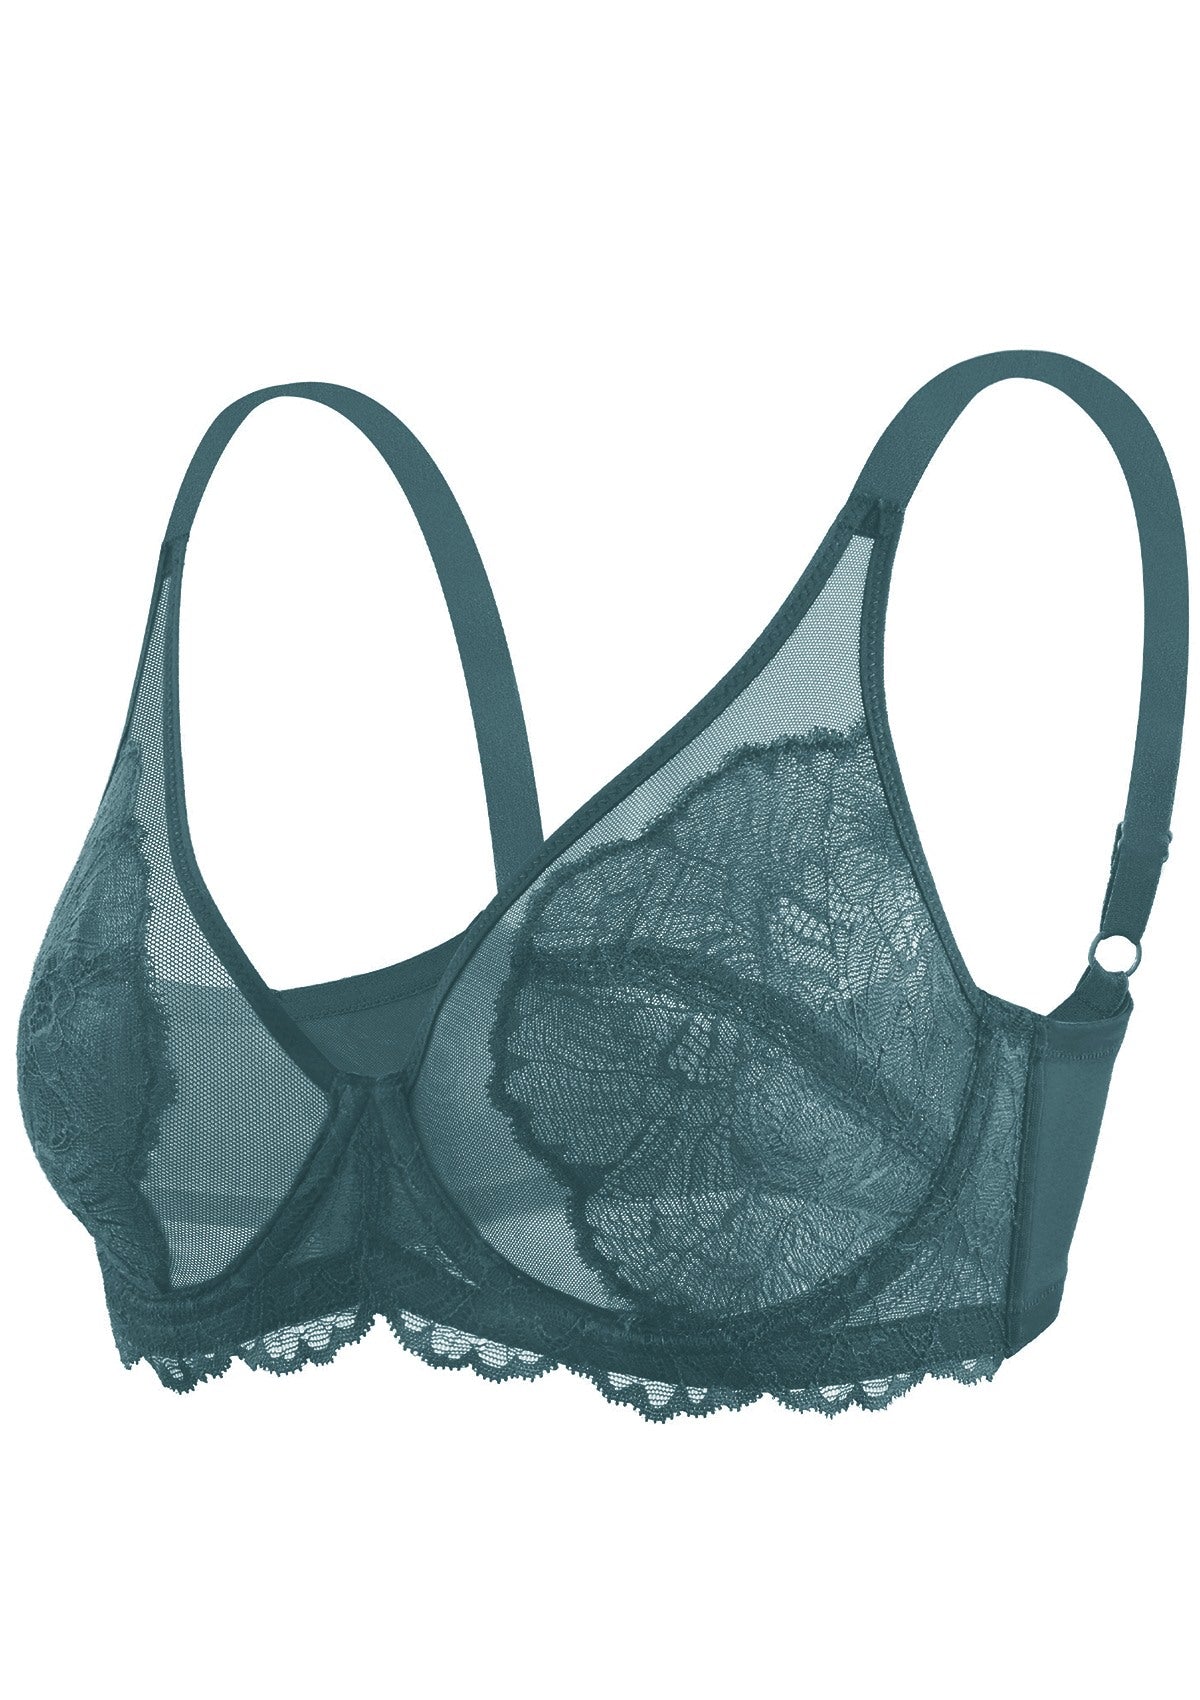 HSIA Blossom Full Figure See-Through Lace Bra For Side And Back Fat - Dark Blue / 38 / DDD/F